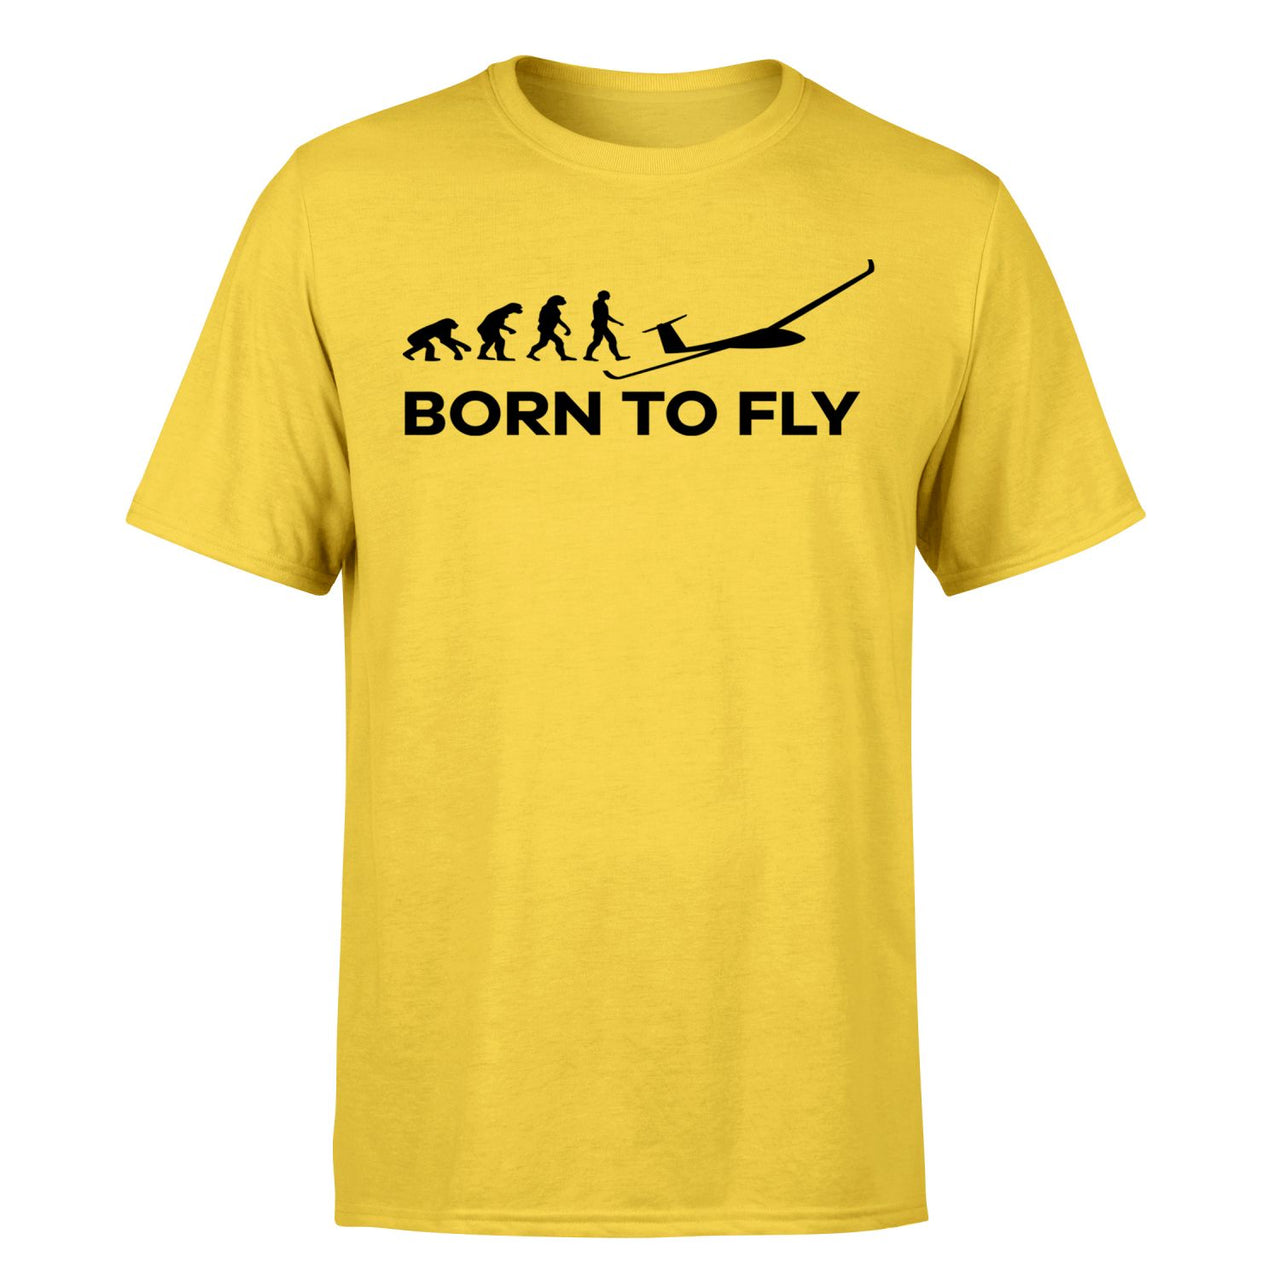 Born To Fly Glider Designed T-Shirts